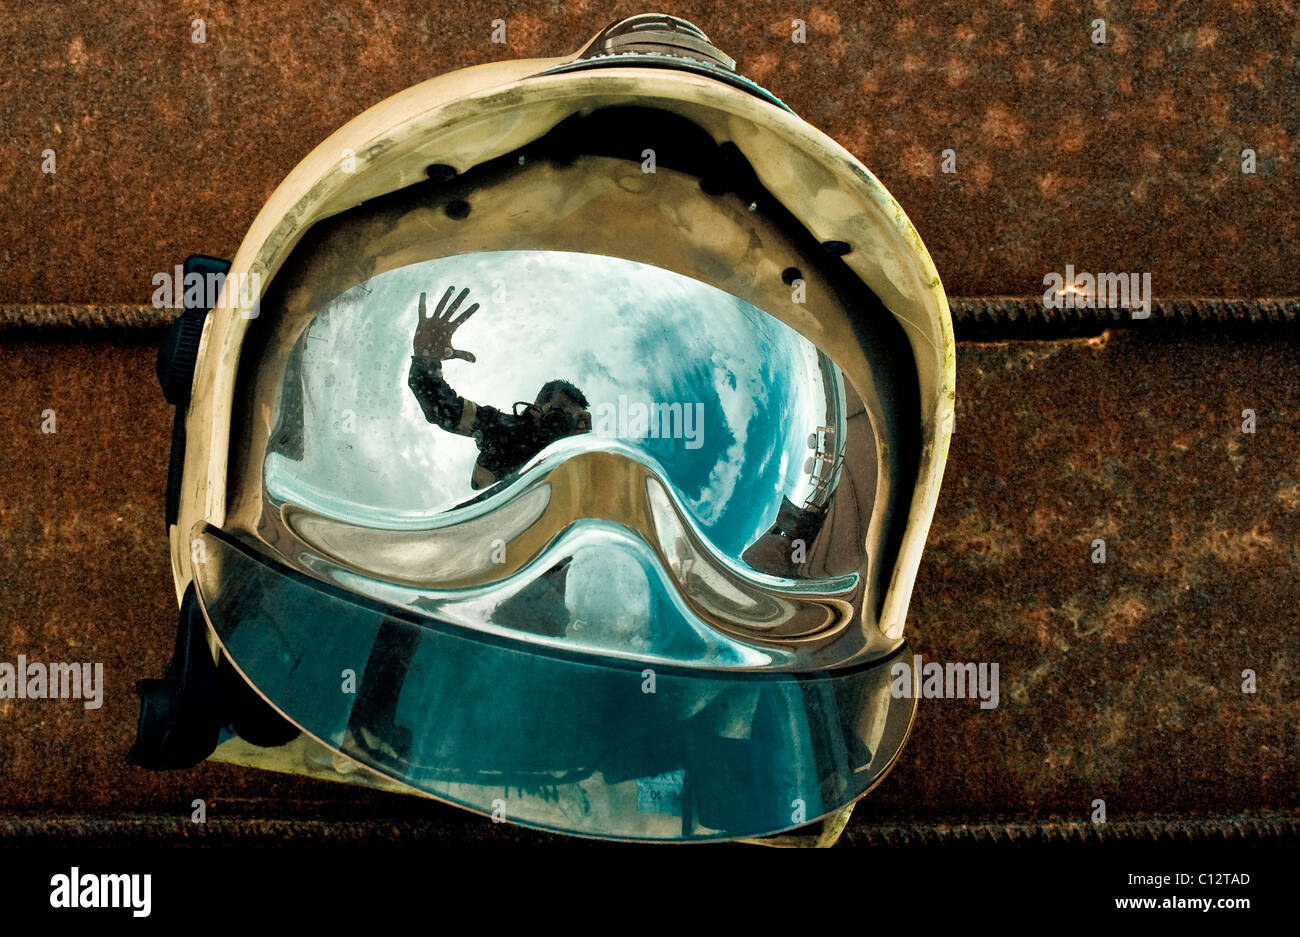 Reflection in a visor of a man waving Stock Photo